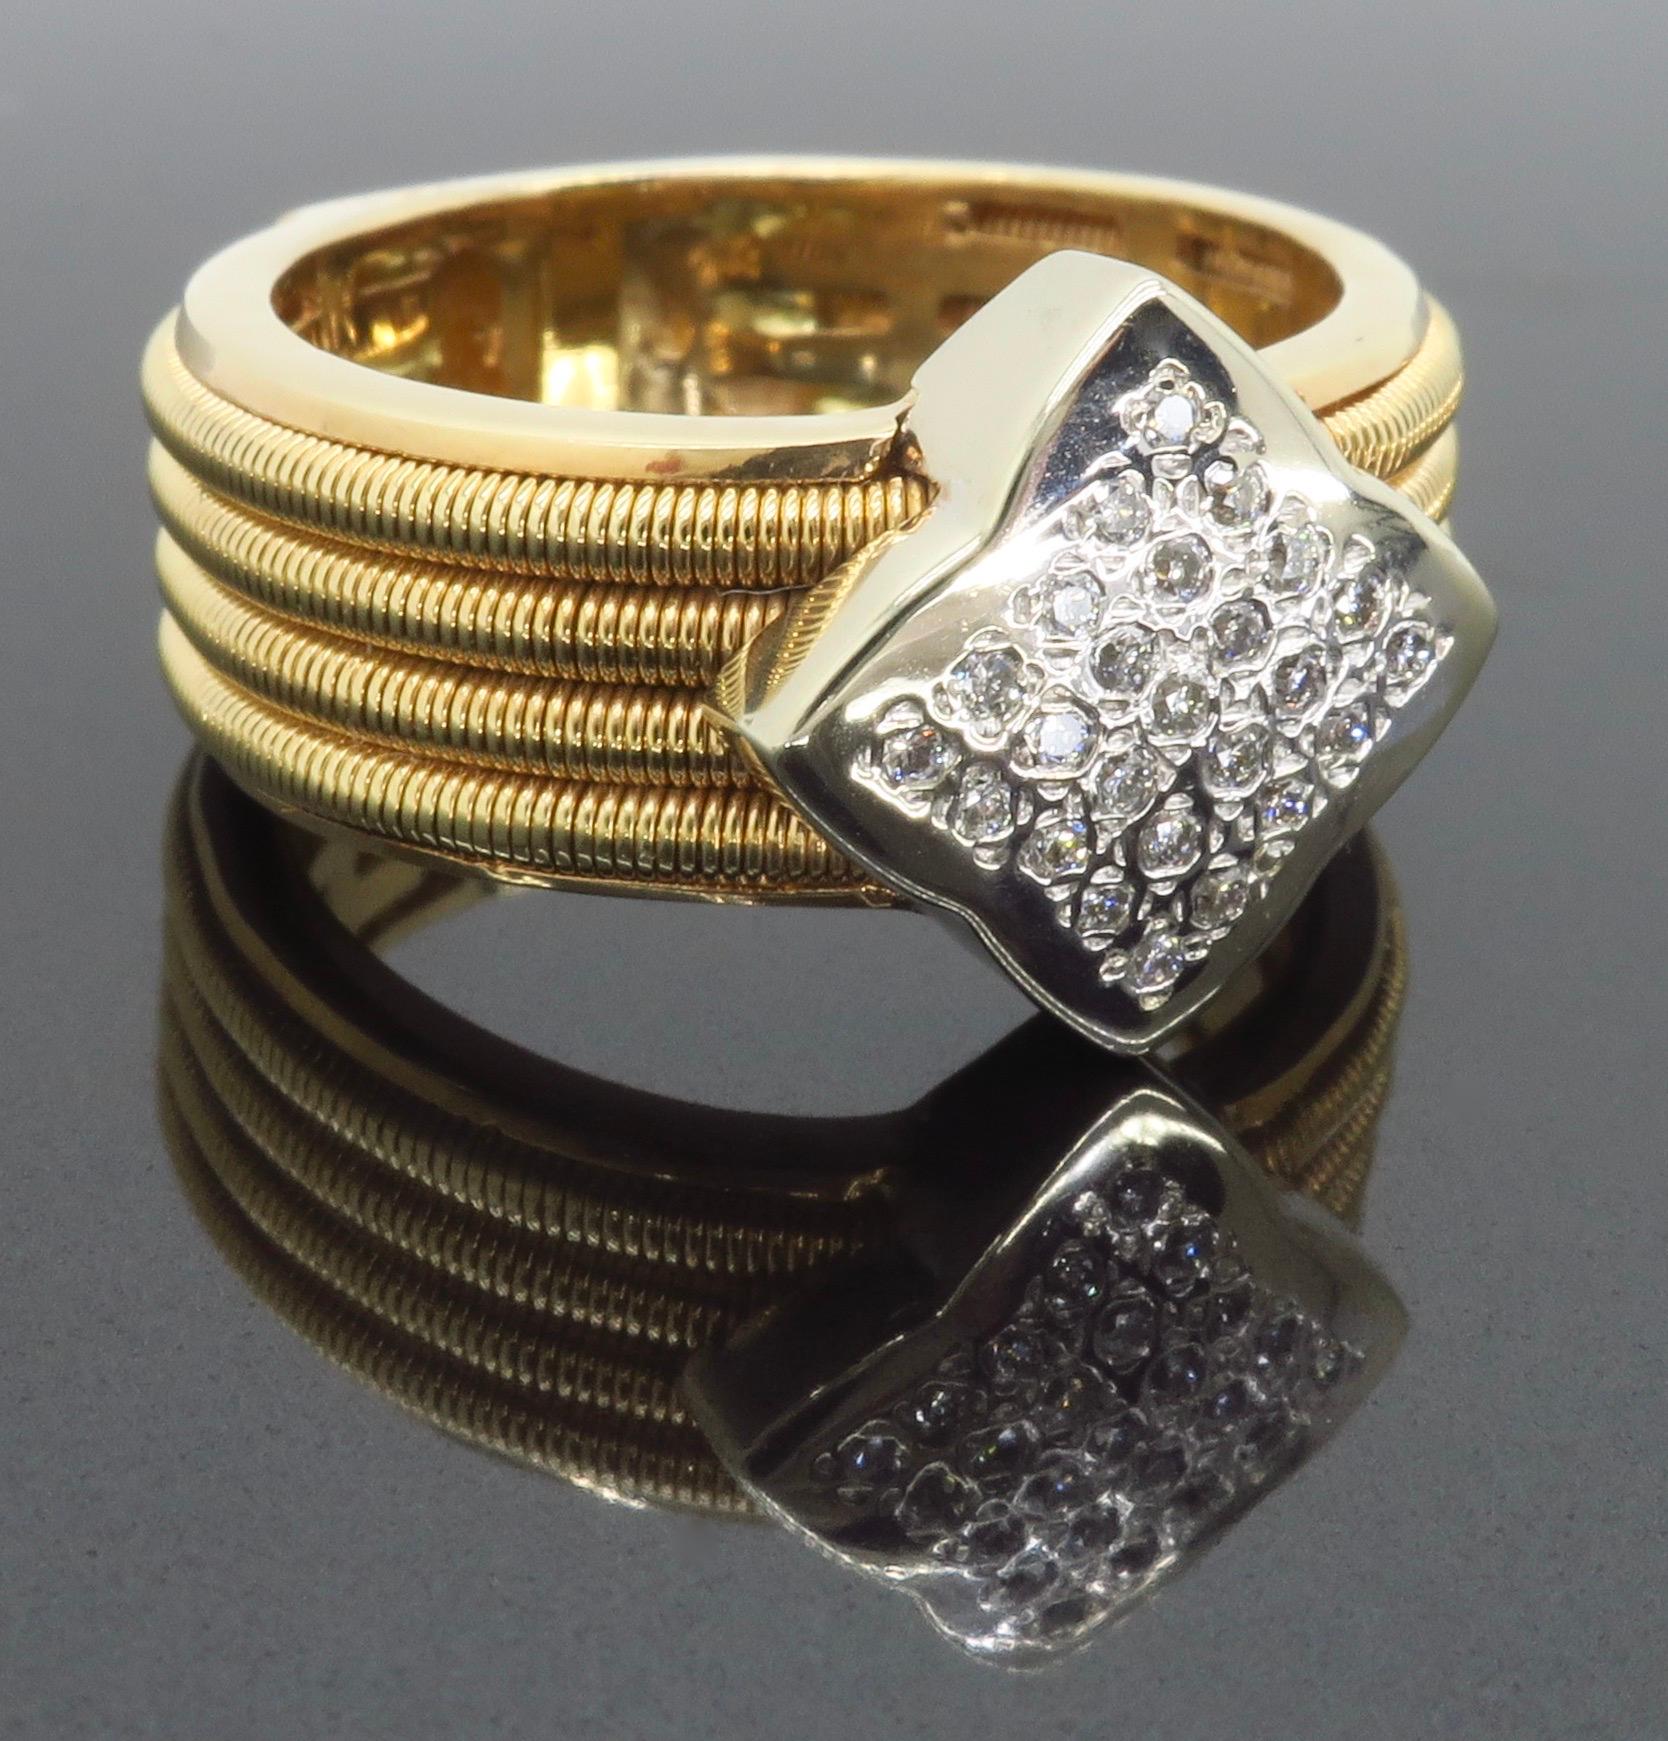 Approximate Diamond Carat Weight: 0.25ctw 
Metal: 18K Yellow Gold
Marked/Tested: Stamped “750” 
Weight: 11.5 Grams
Ring Size: 8